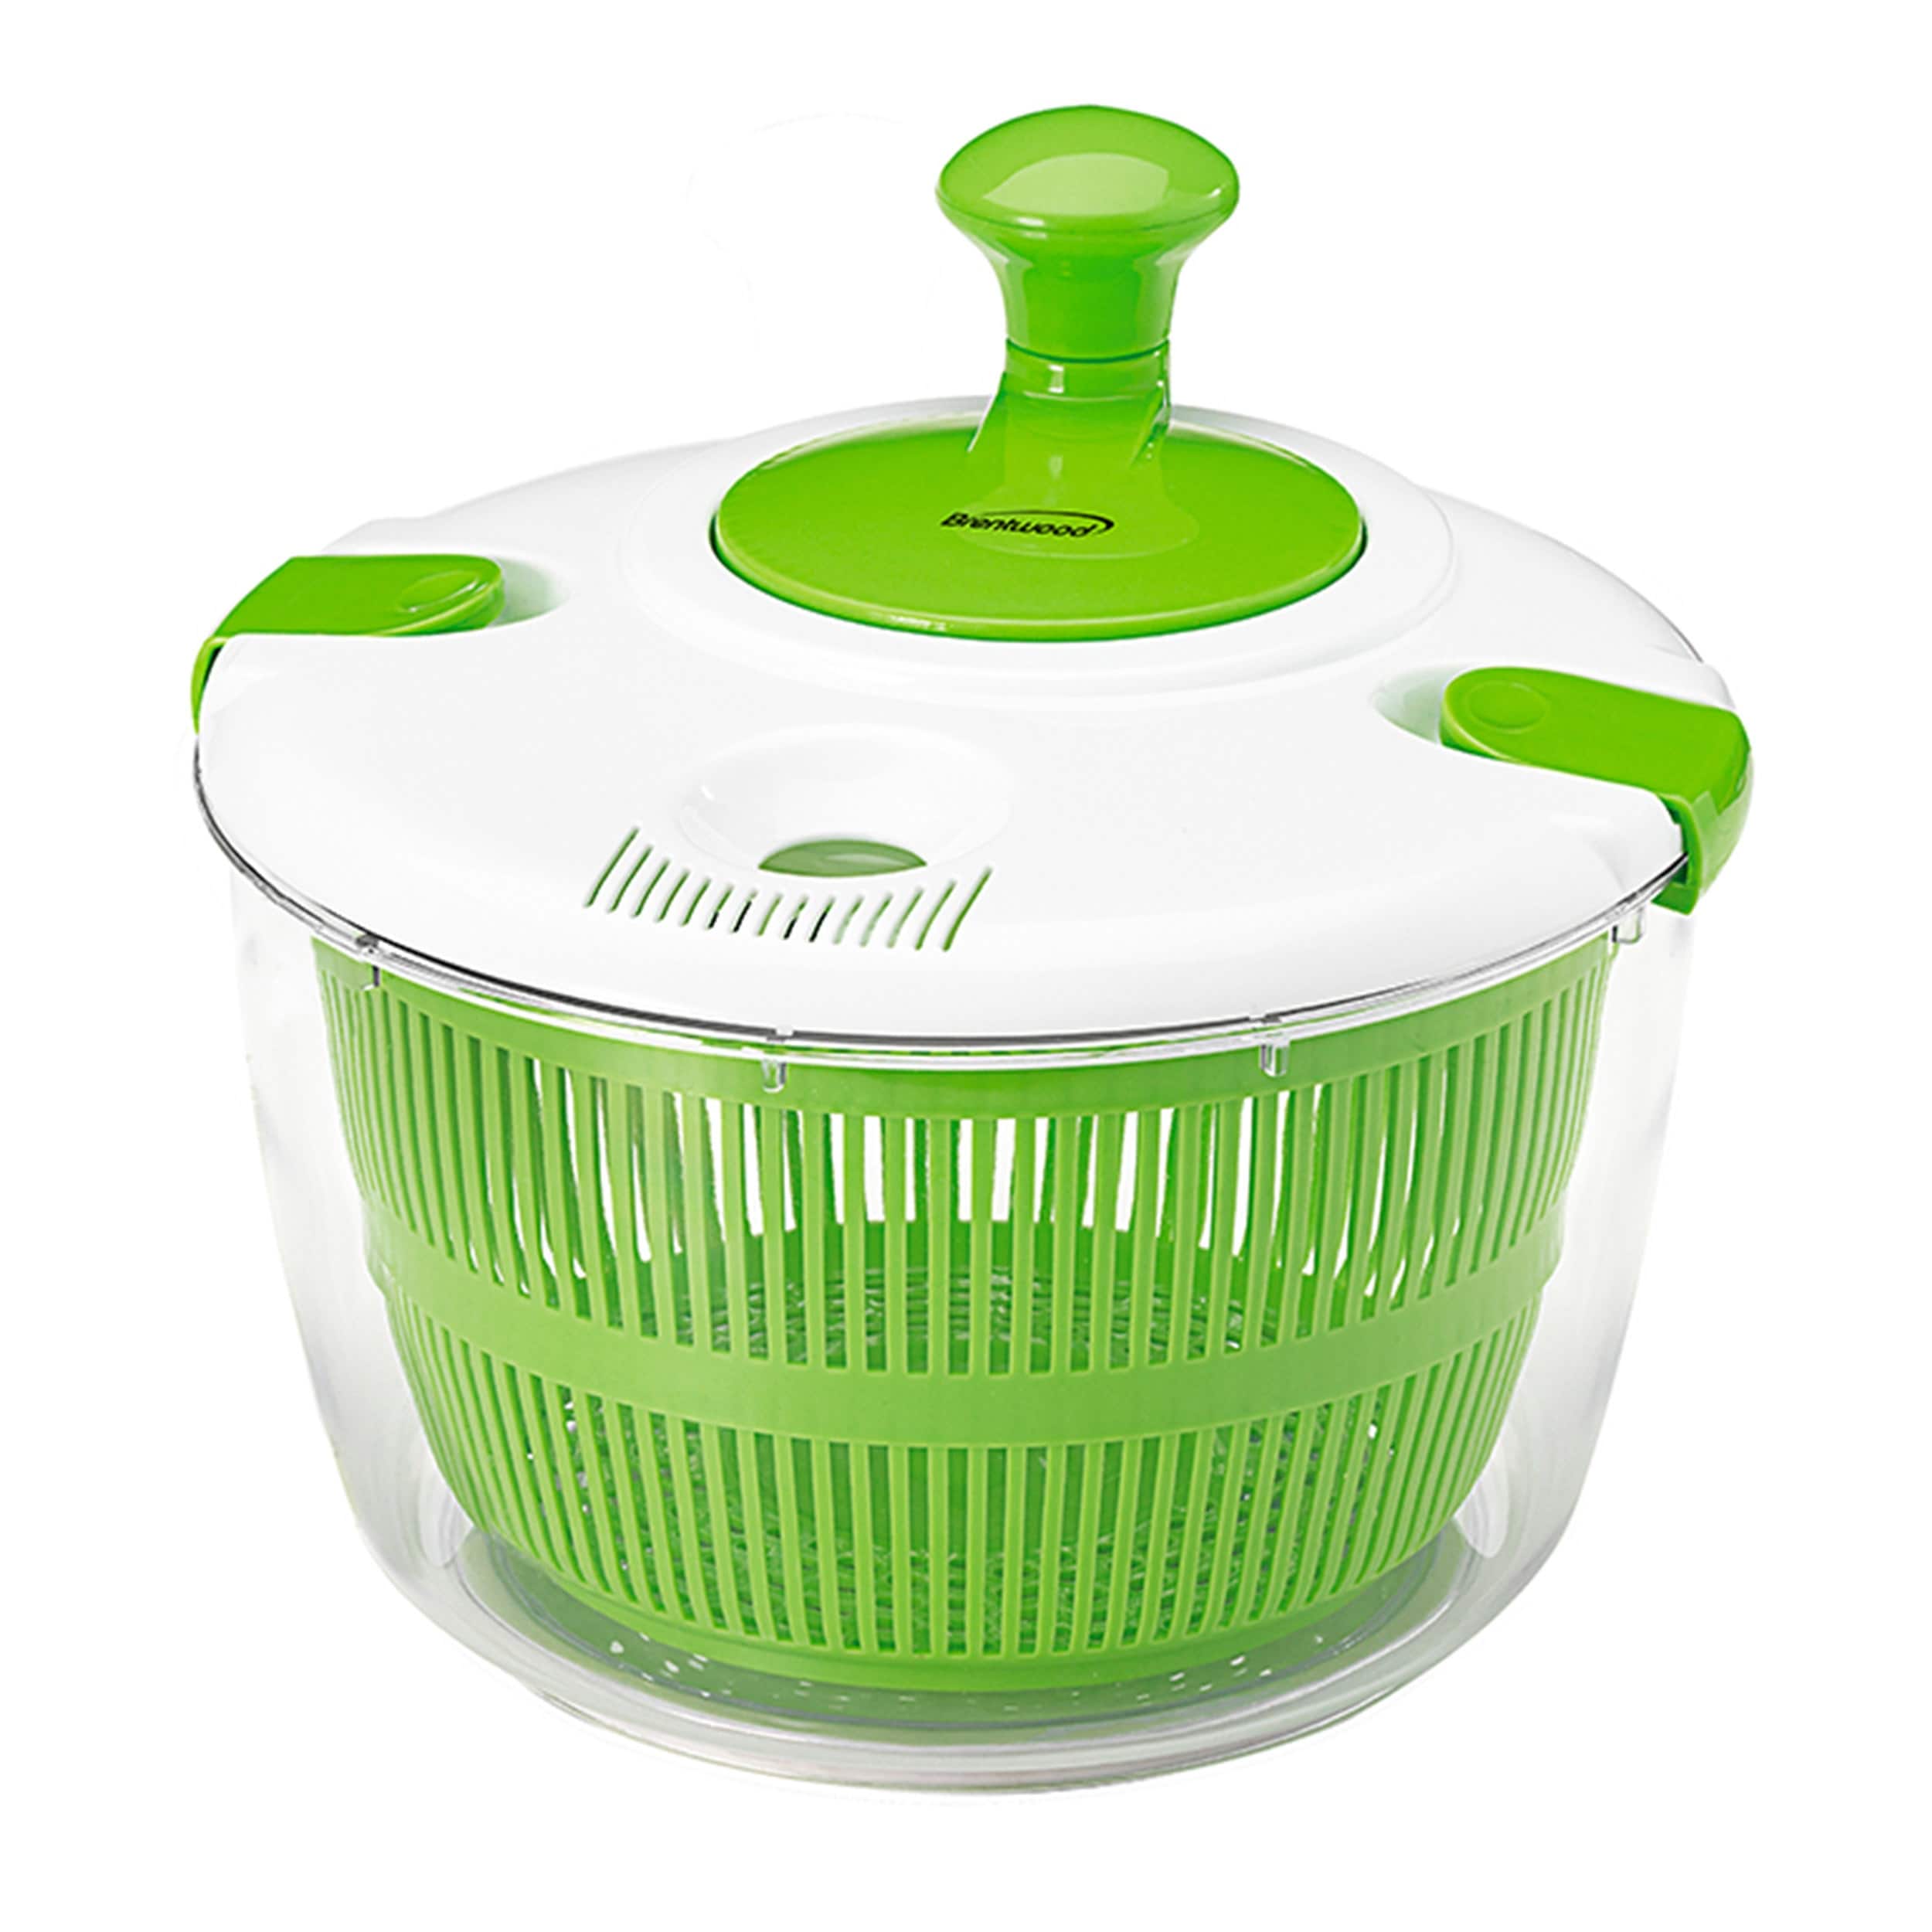 https://ak1.ostkcdn.com/images/products/is/images/direct/12fab1a0106c0e71e416f28253f781db73a606bc/Brentwood-5-Quart-Salad-Spinner-with-Serving-Bowl-in-Green.jpg